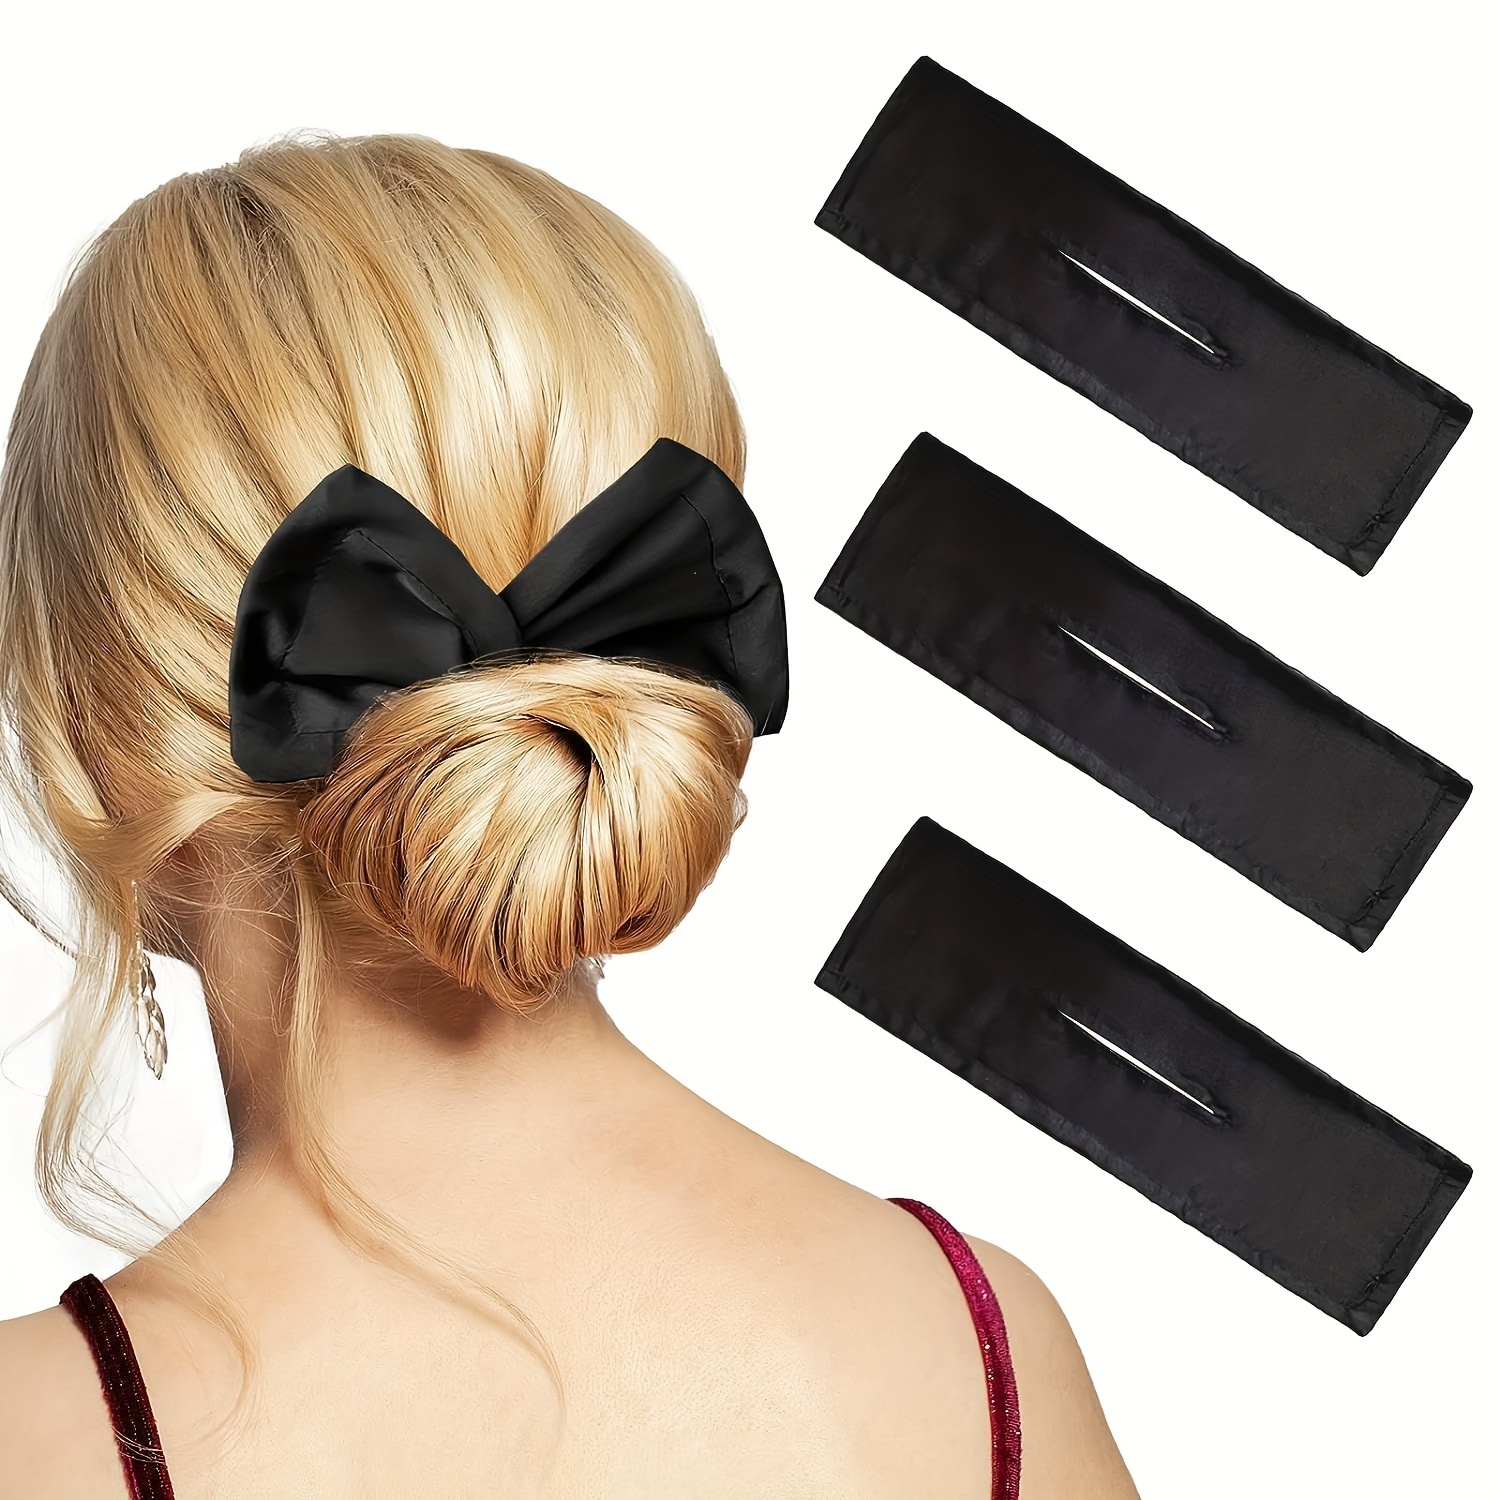 

innovative Styling" Elegant Magic Bow Hair Bun Maker - Twist & Clip Styling Tool For Women, Cotton Blend, Perfect For All Hair Types